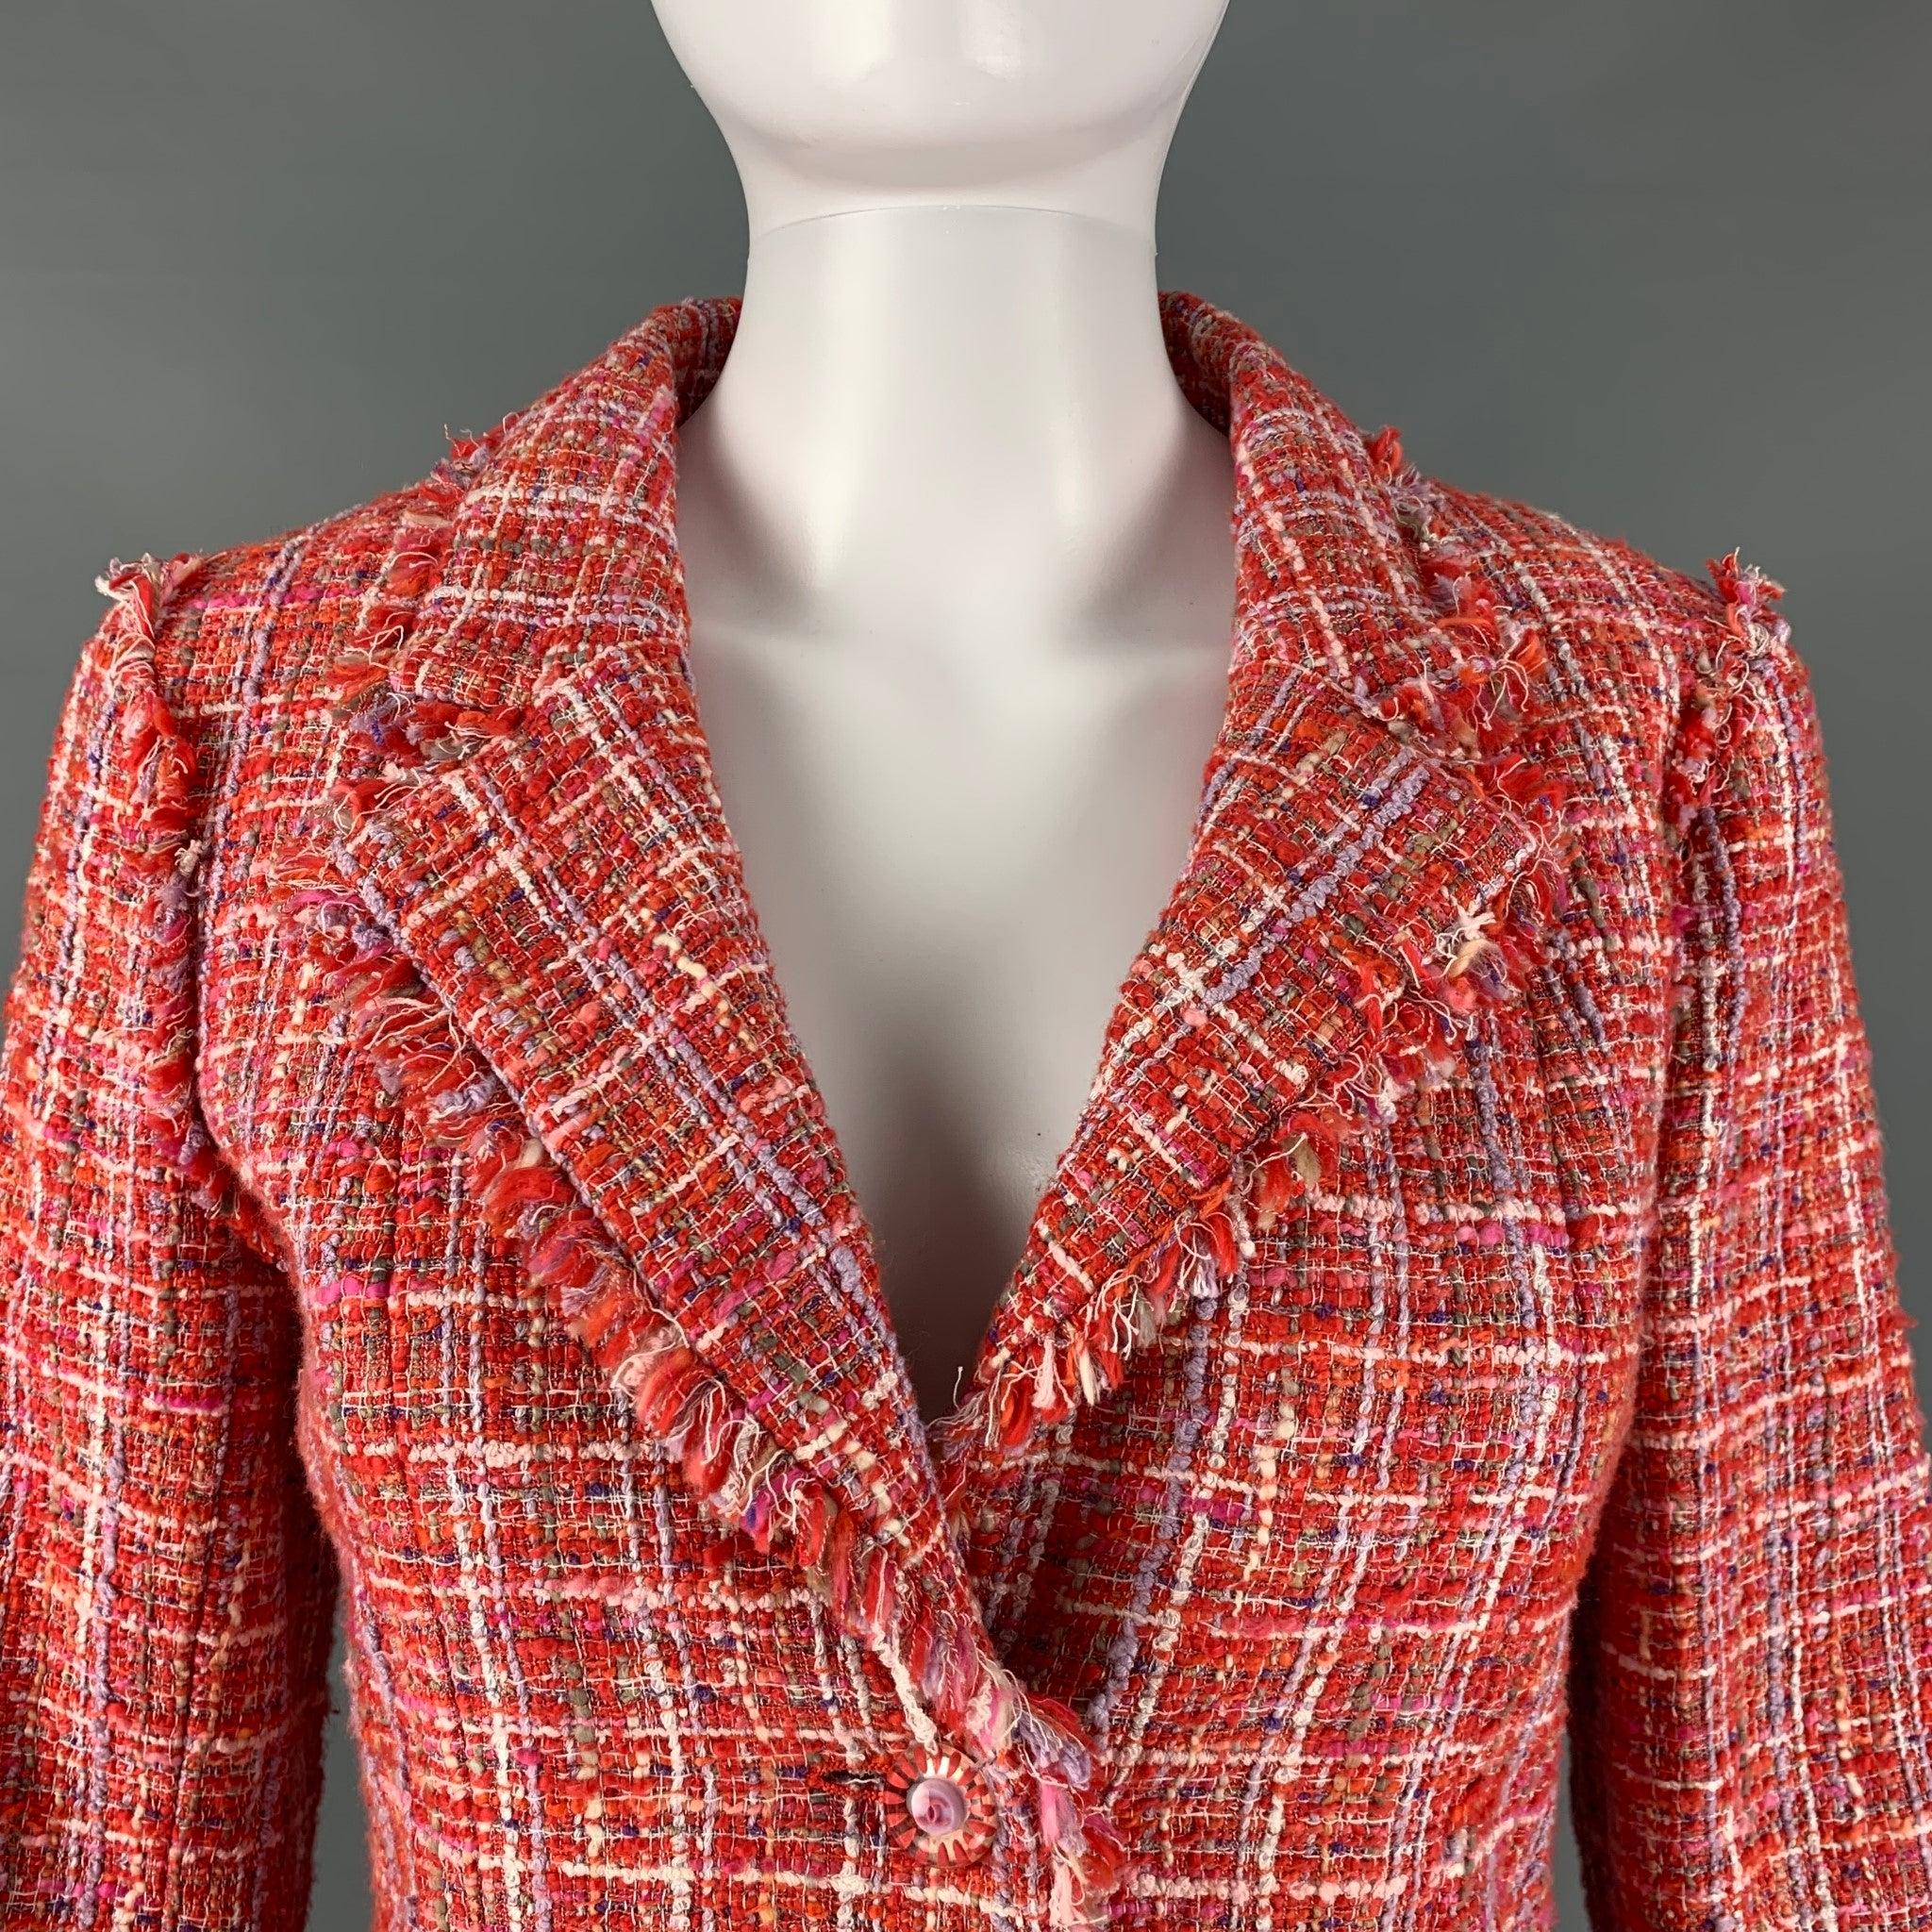 CHANEL 2004 jacket comes in a red and white boucle cotton blend with a full monogram liner featuring a notch lapel, chanel logo buttons detail, and a three button closure. Made in France. Excellent Pre-Owned Condition.  

Marked:   P23159V13825 36